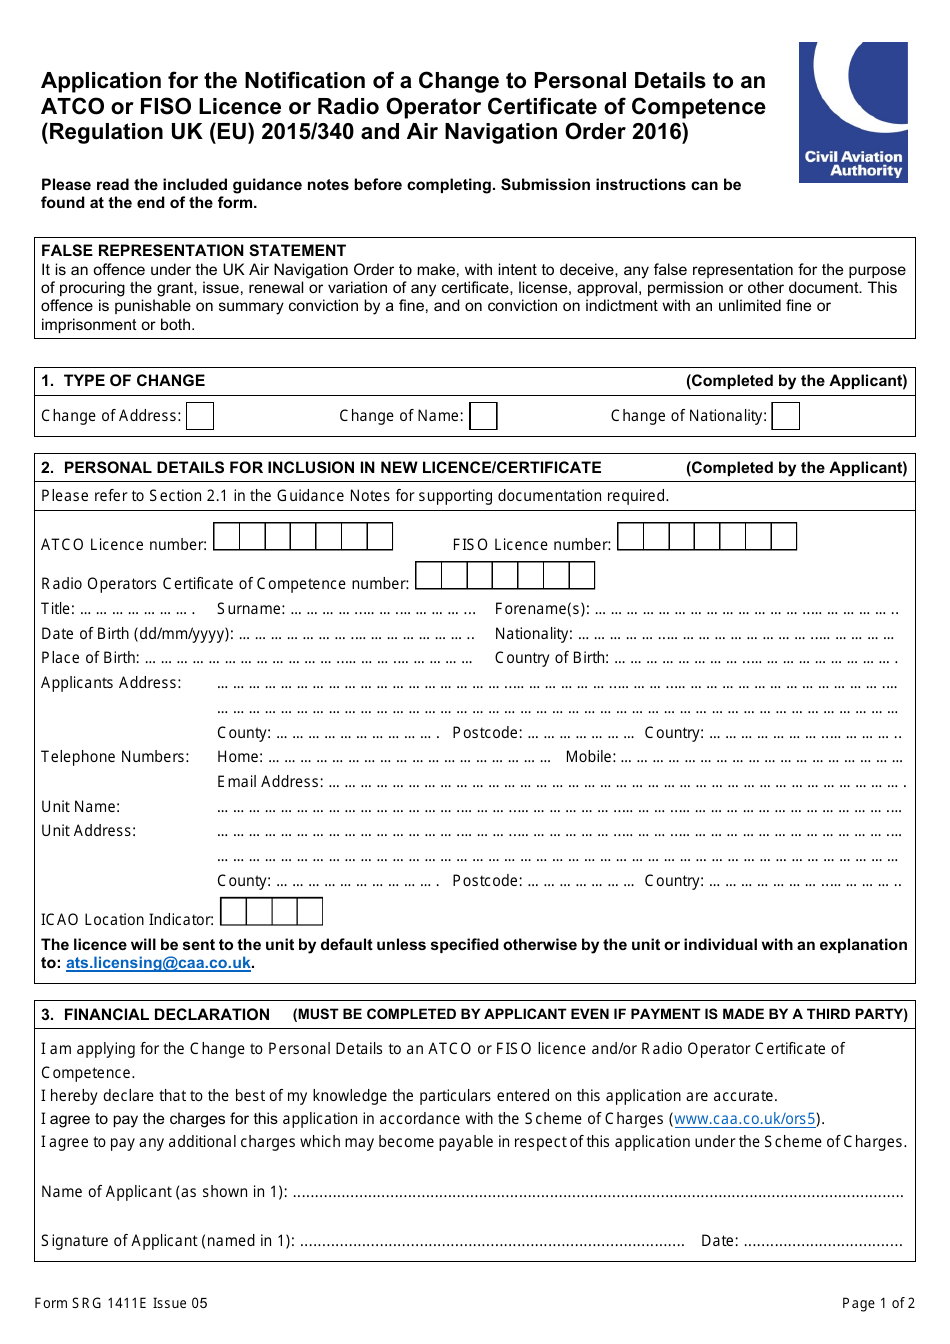 Form SRG1411E Application for the Notification of a Change to Personal Details to an Atco or Fiso Licence or Radio Operator Certificate of Competence (Regulation UK (Eu) 2015 / 340 and Air Navigation Order 2016) - United Kingdom, Page 1